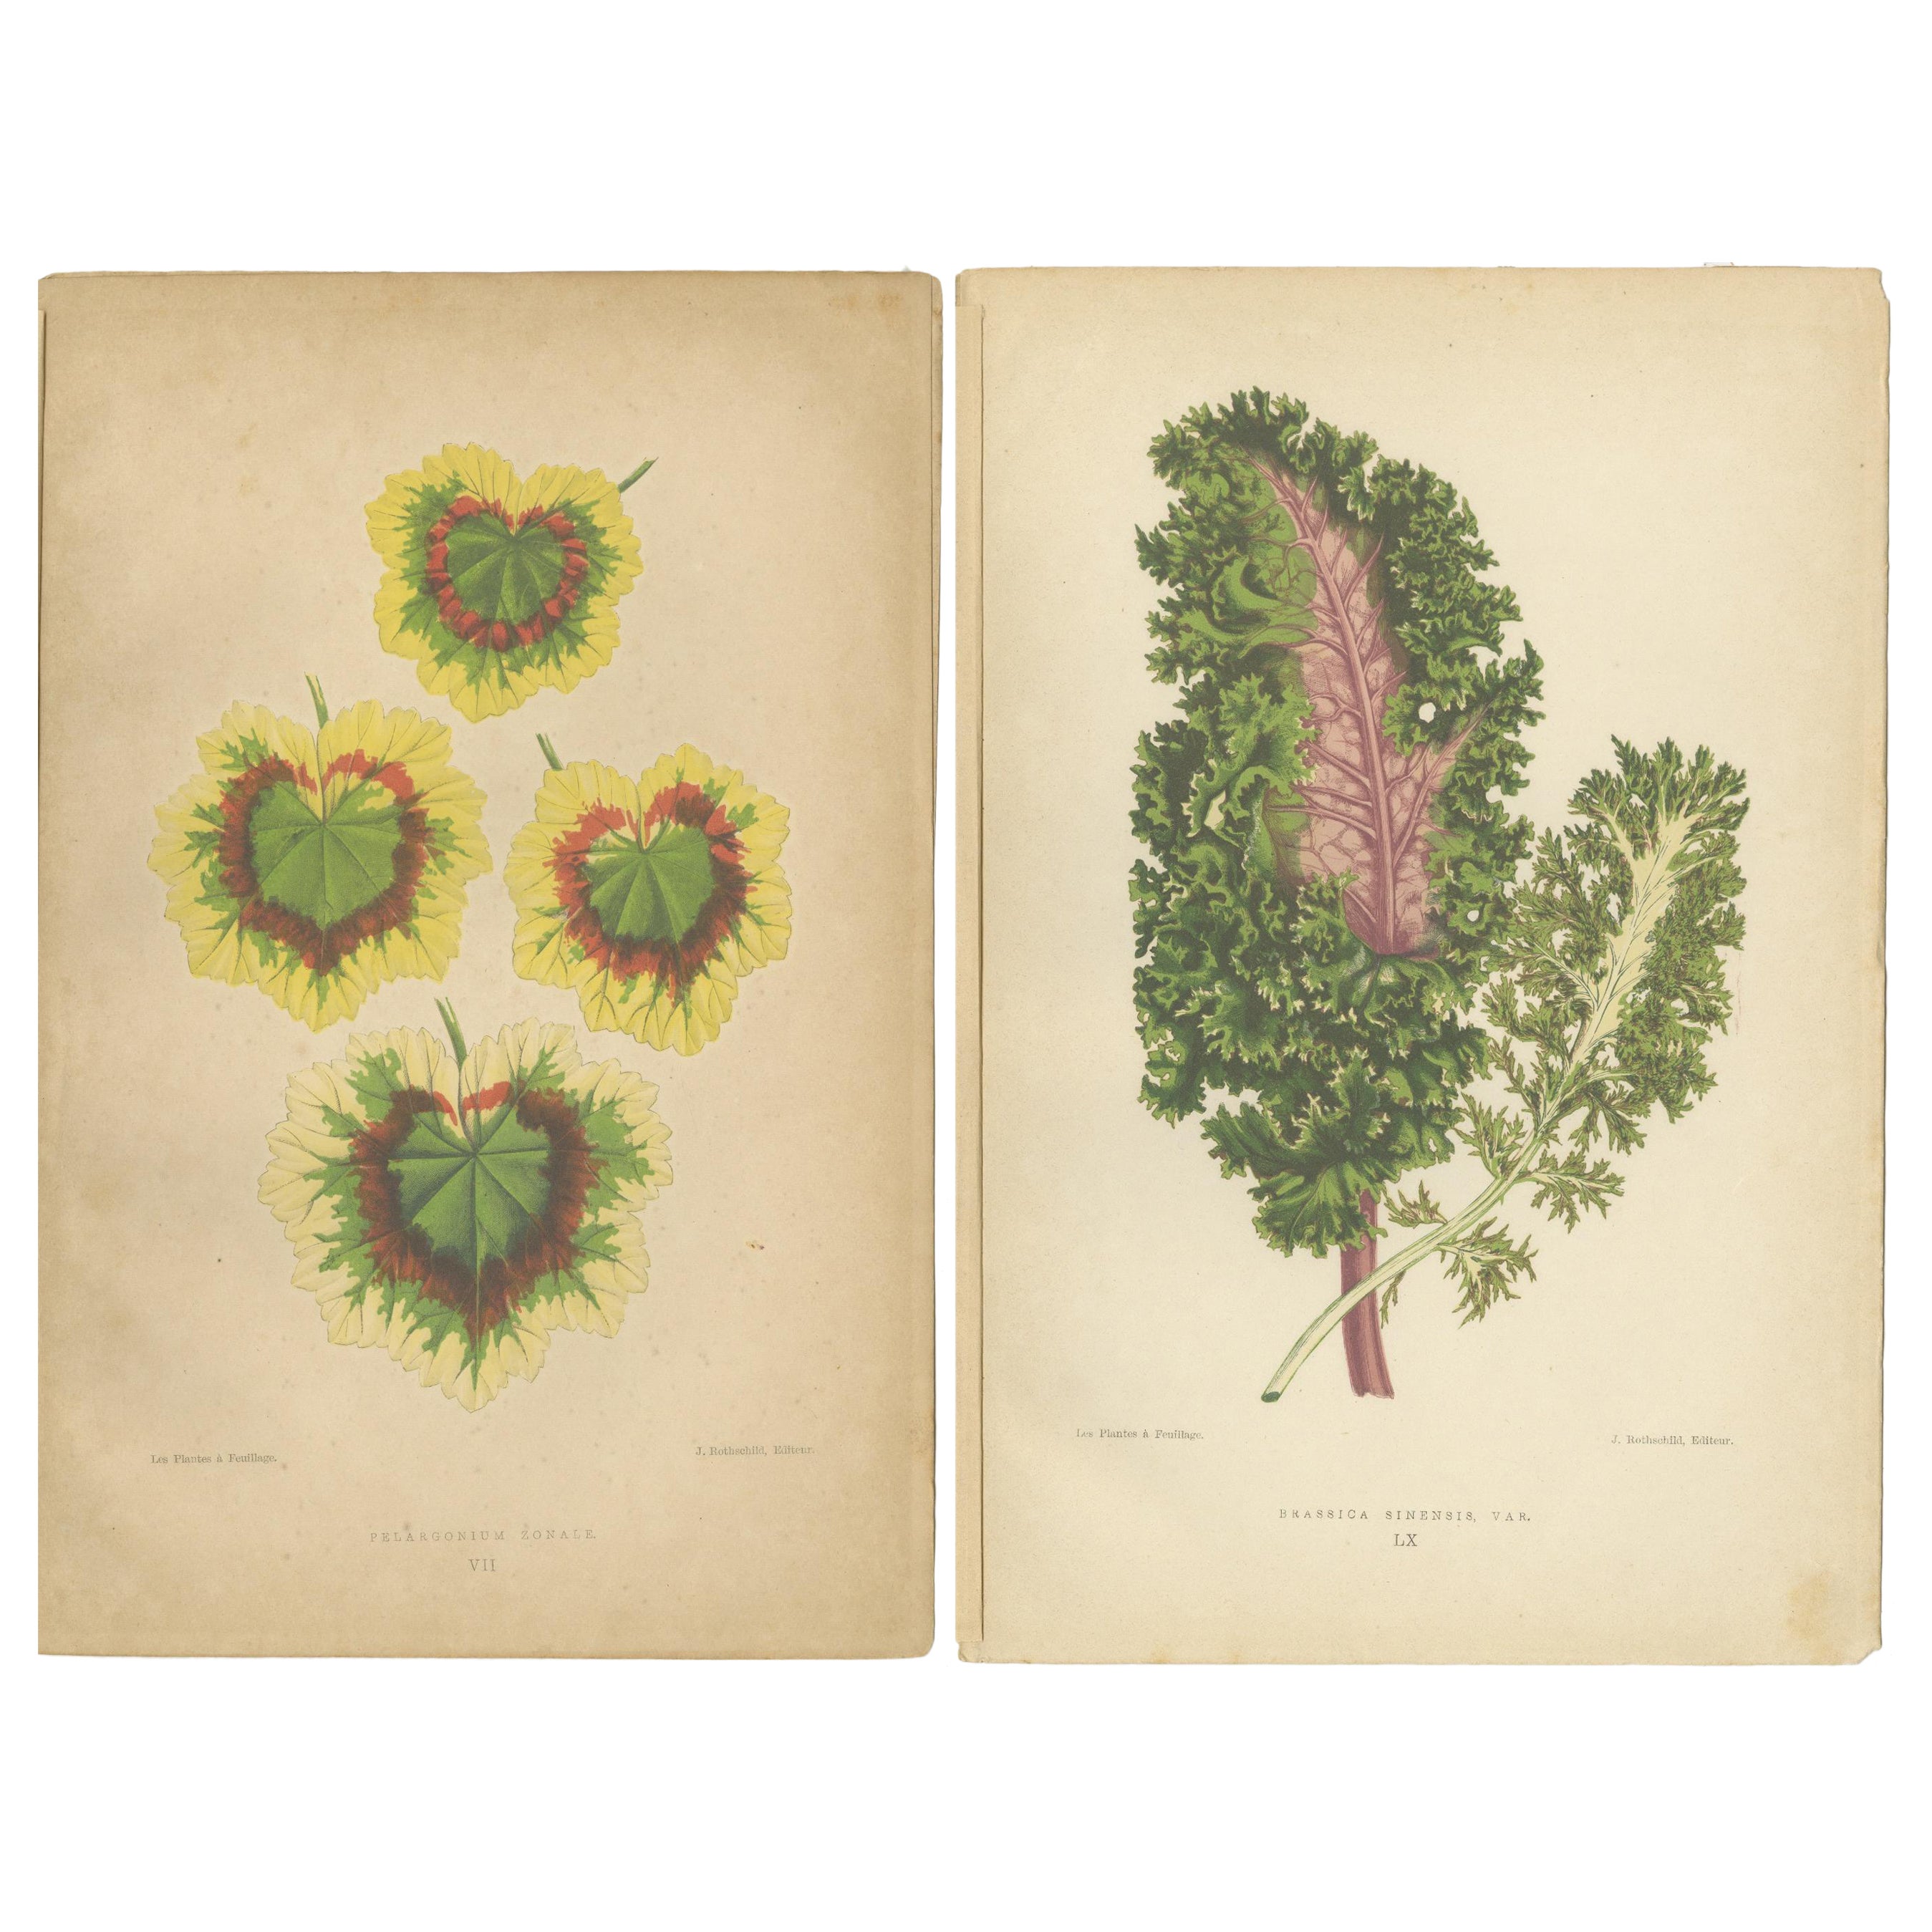 Contrasts in Nature: Pelargonium and Brassica - Botanical Art from 1880 For Sale